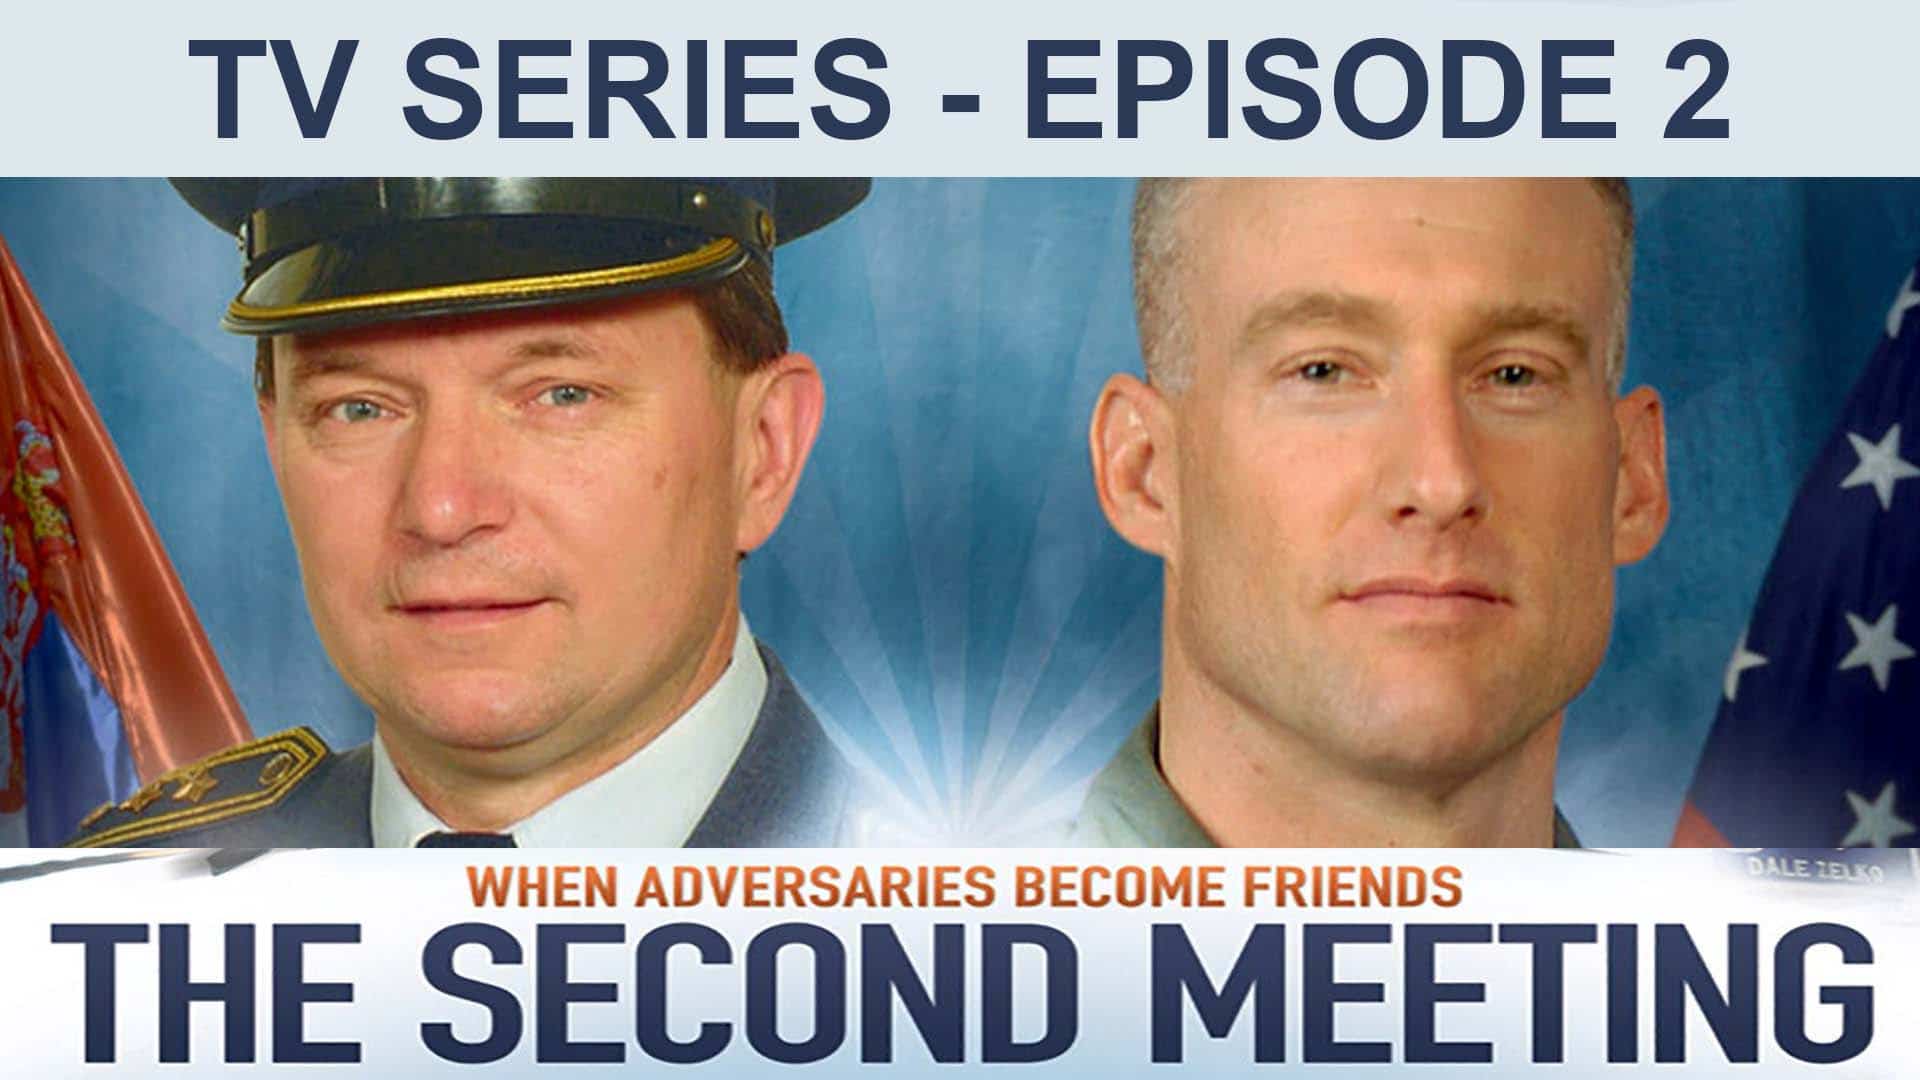 The Second Meeting TV Series Episode 2